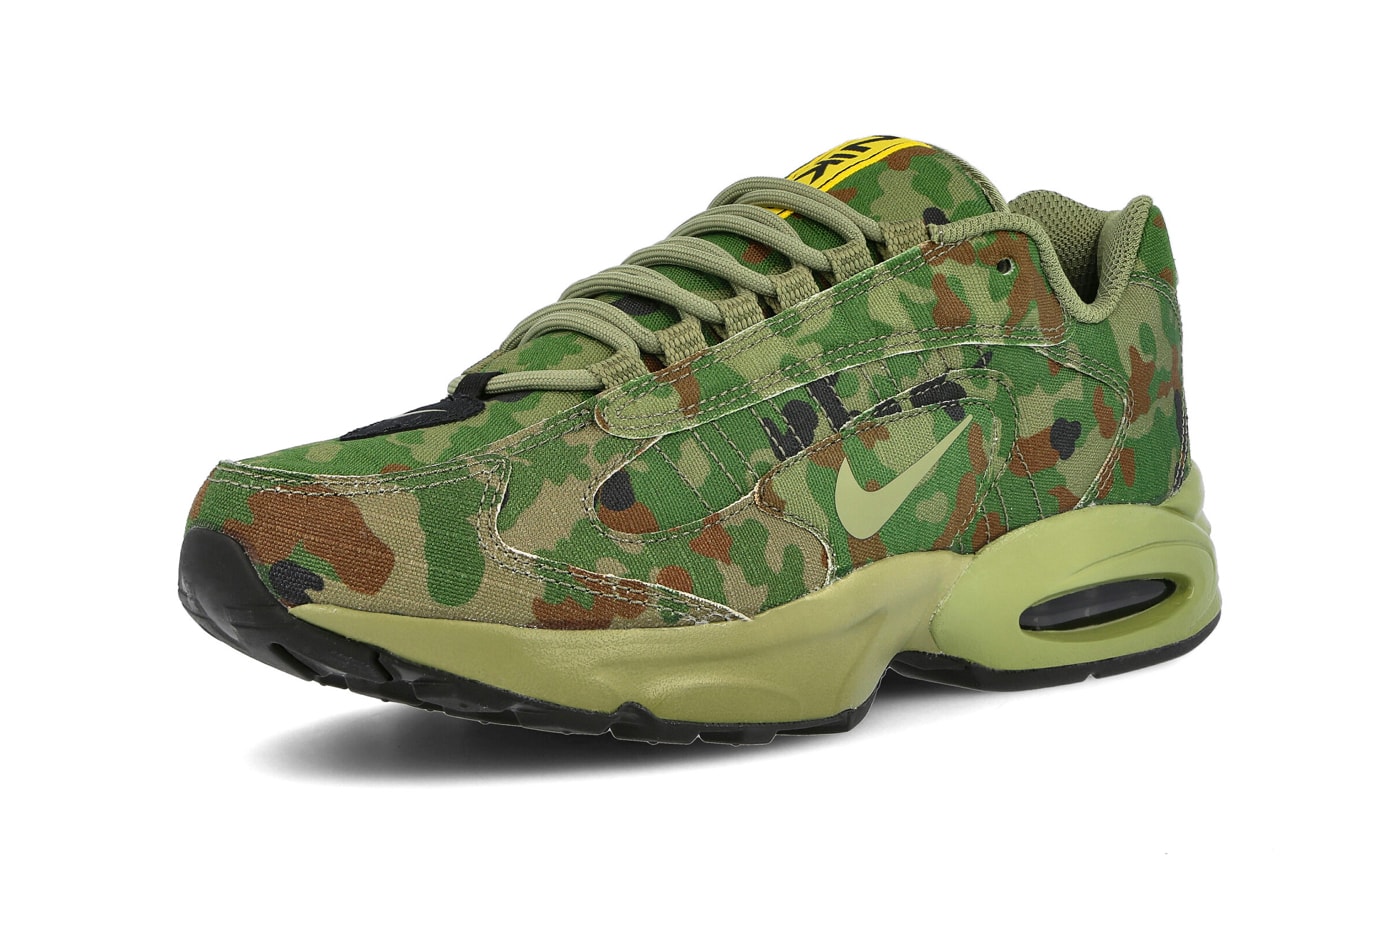 Nike Air Max Triax 96 SP Safari Thermal Green LT Chocolate Black frogskin camo CT5543 300 menswear streetwear shoes sneakers trainers runners spring summer 2020 collection